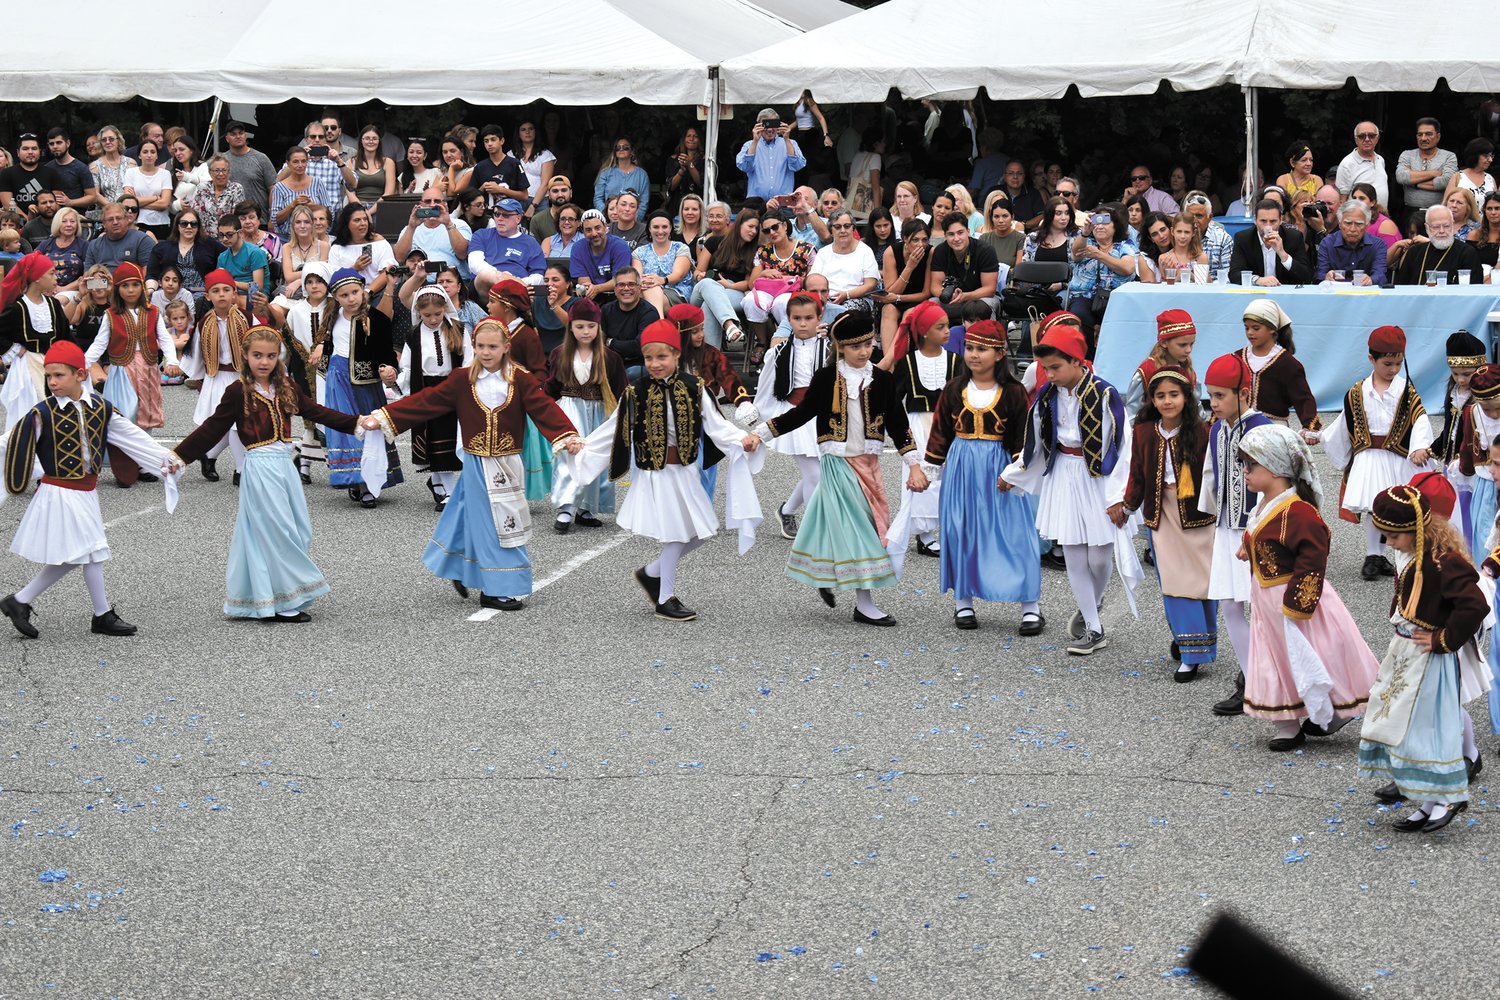 TERRIFIC TROUPE: The Odyssey Dance Troupe again put on five prolific performances that impressed hundreds of people who visited the Cranston Greek Festival last weekend.